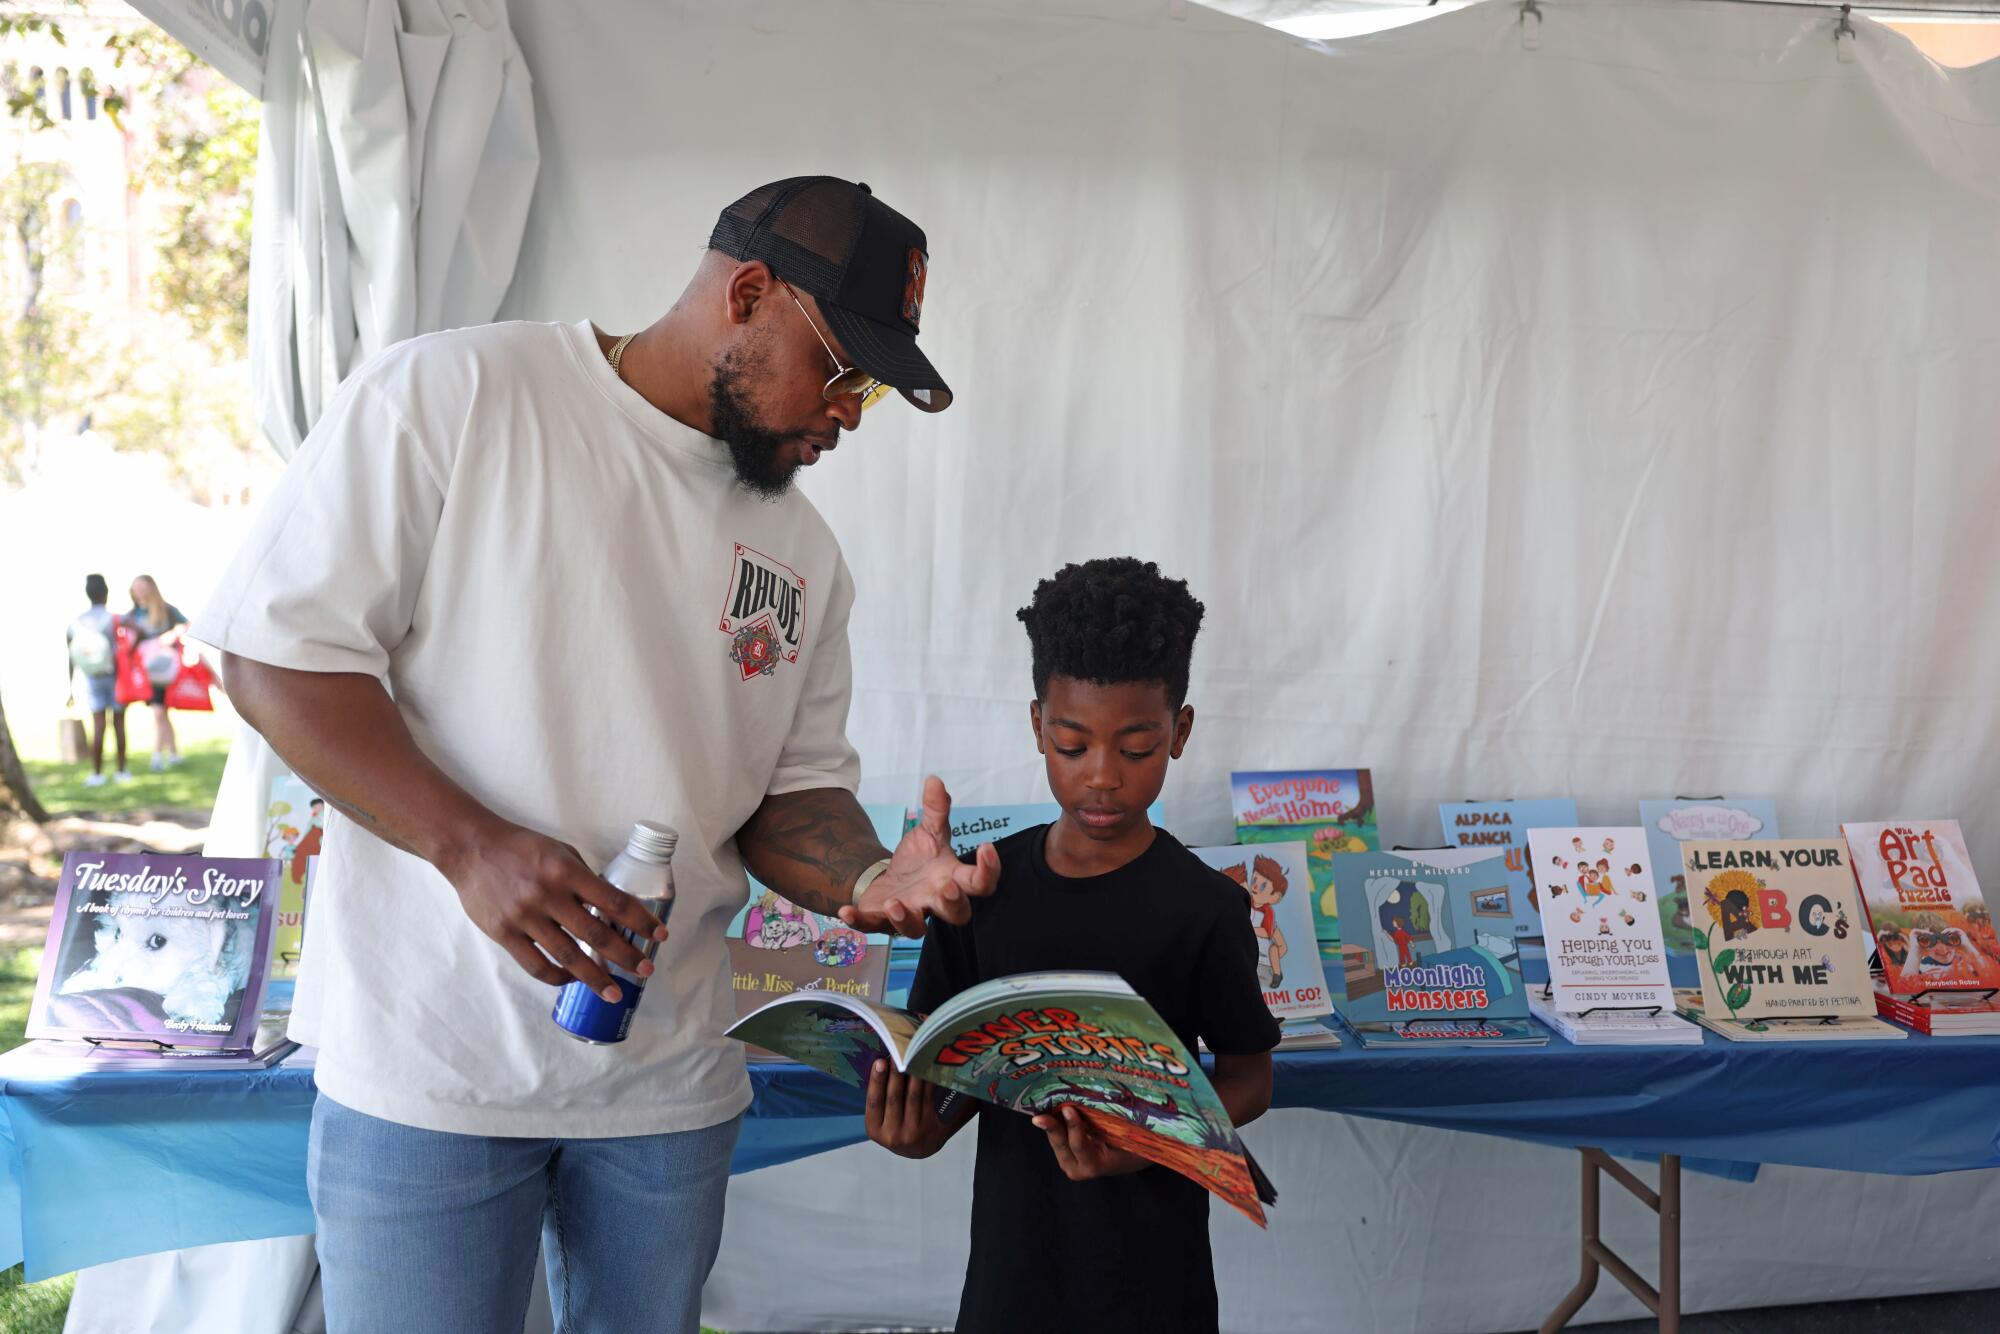 Richard Stokes talks to his son Karter, 8, who thumbs through a book, at a festival booth.